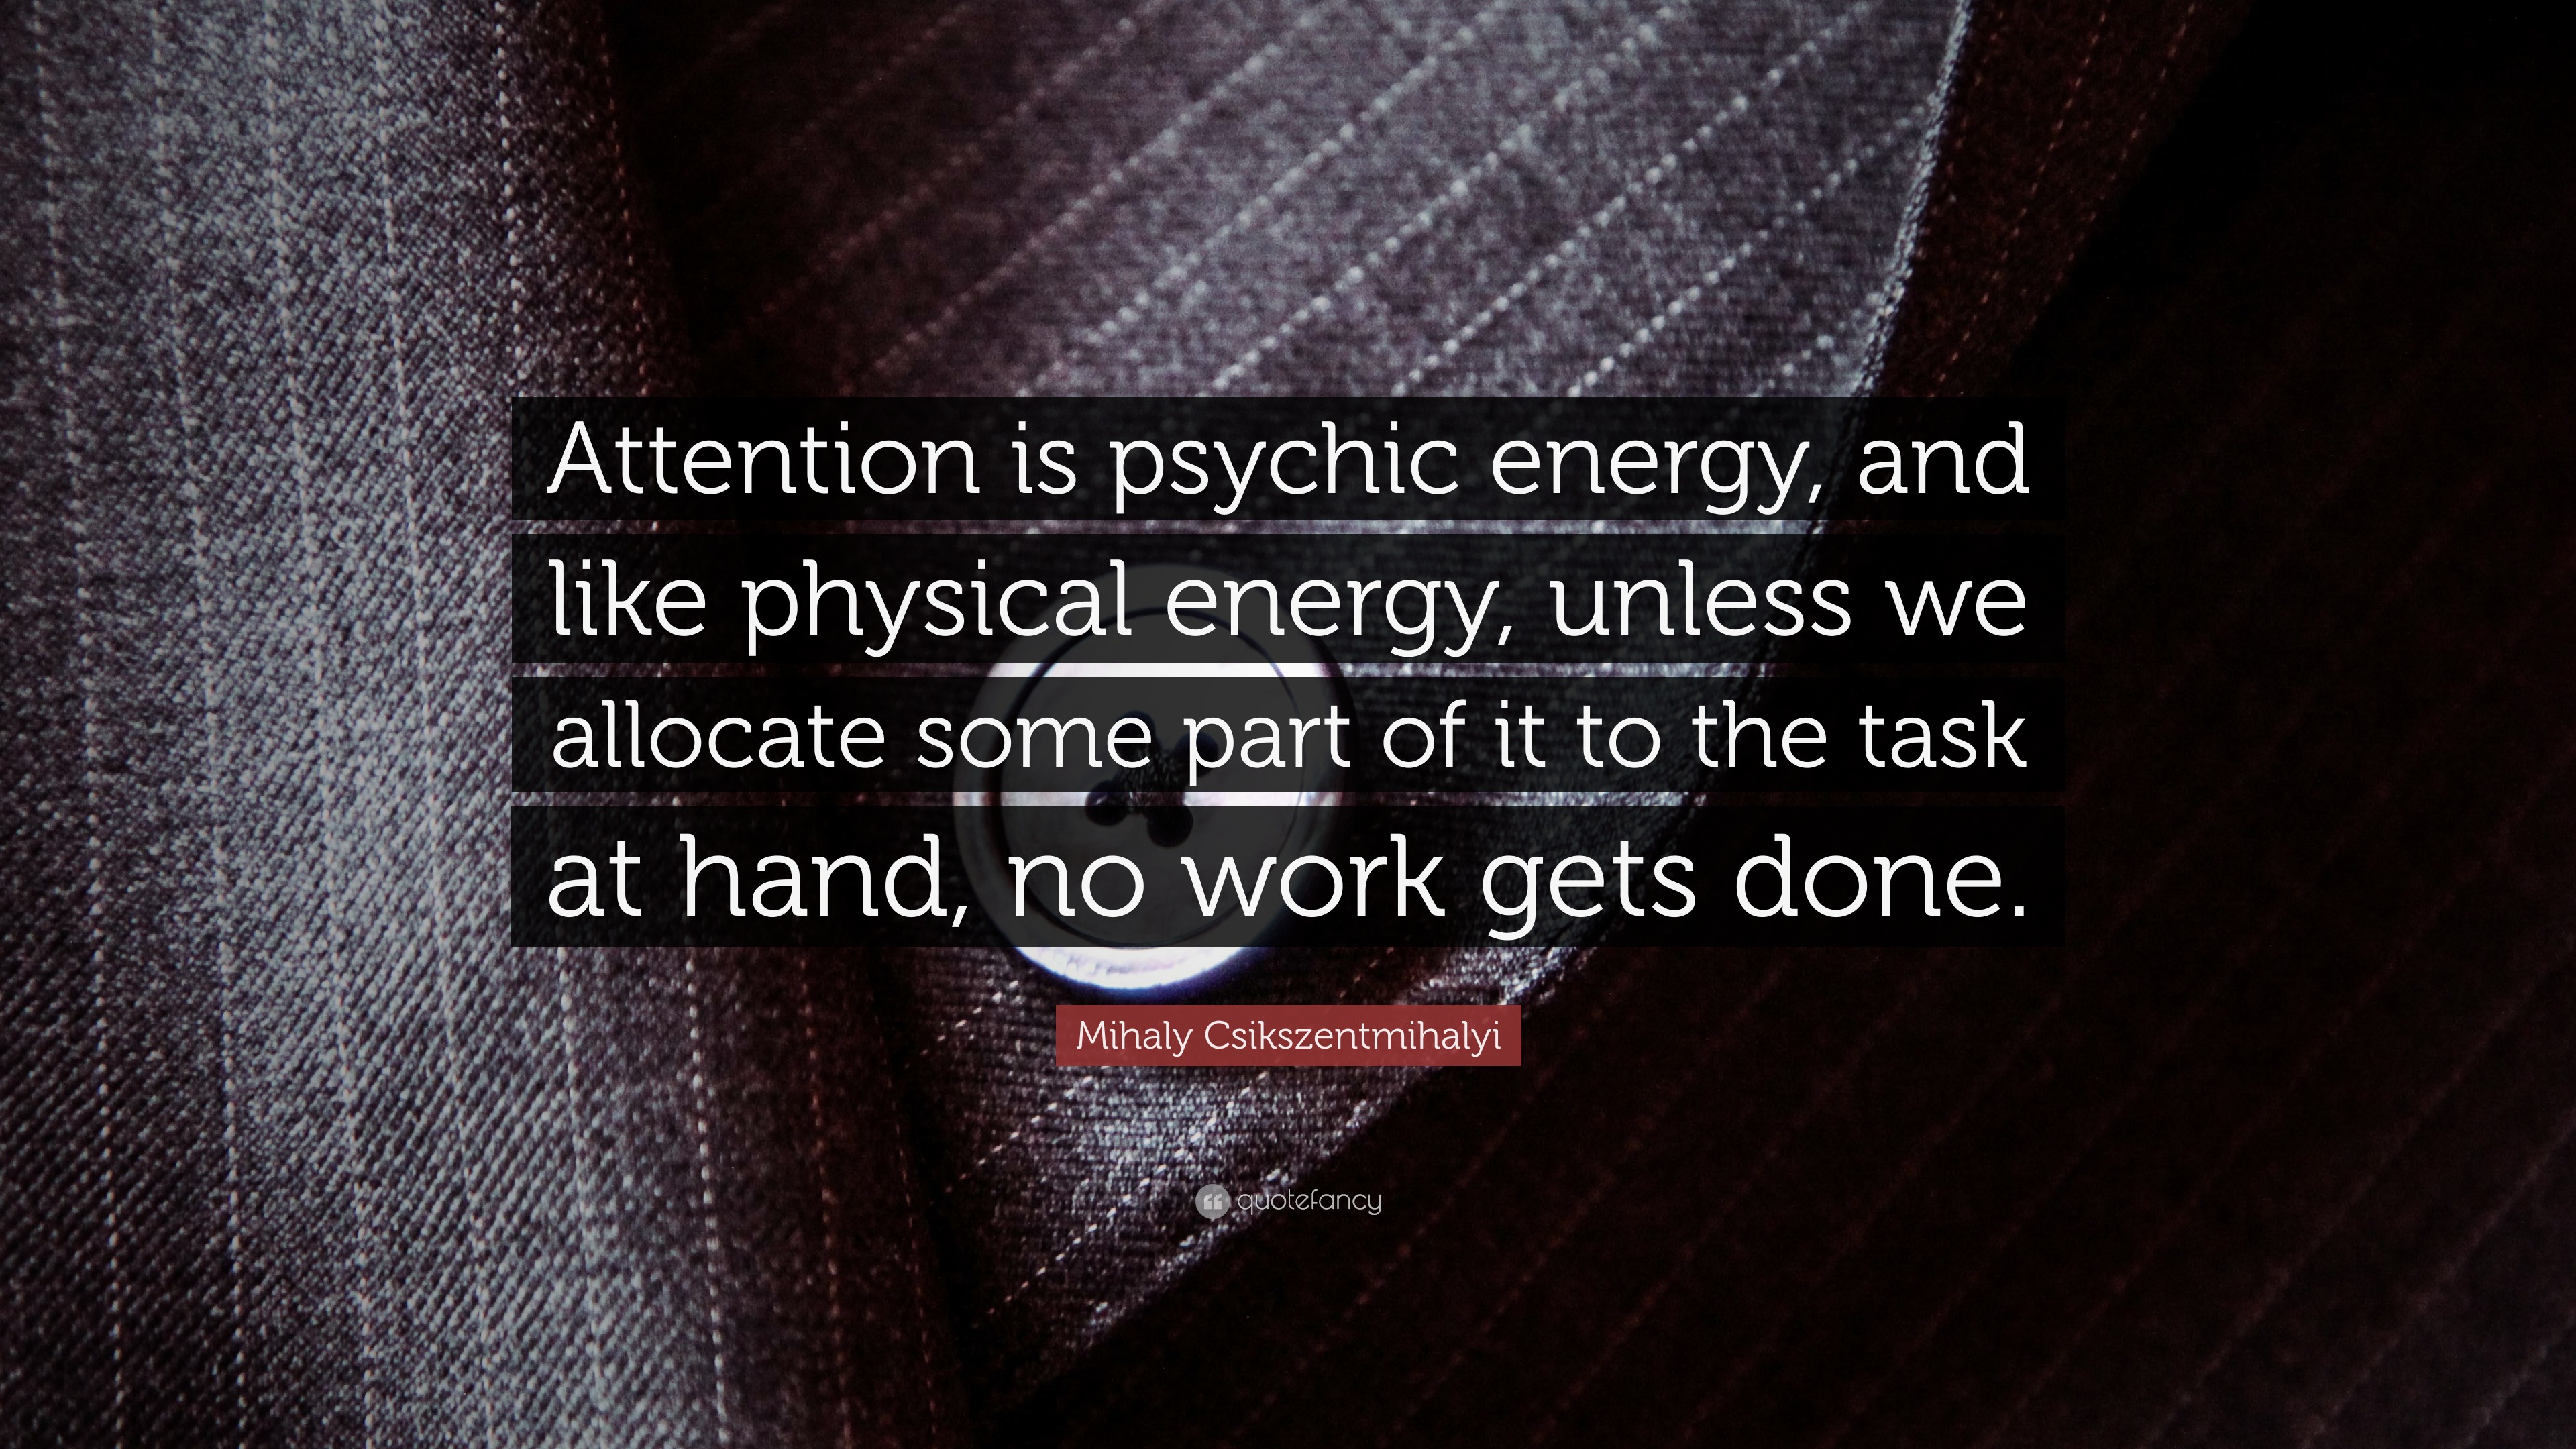 Mihaly Csikszentmihalyi Quote: “Attention is psychic energy, and like ... Energy Physics Quotes